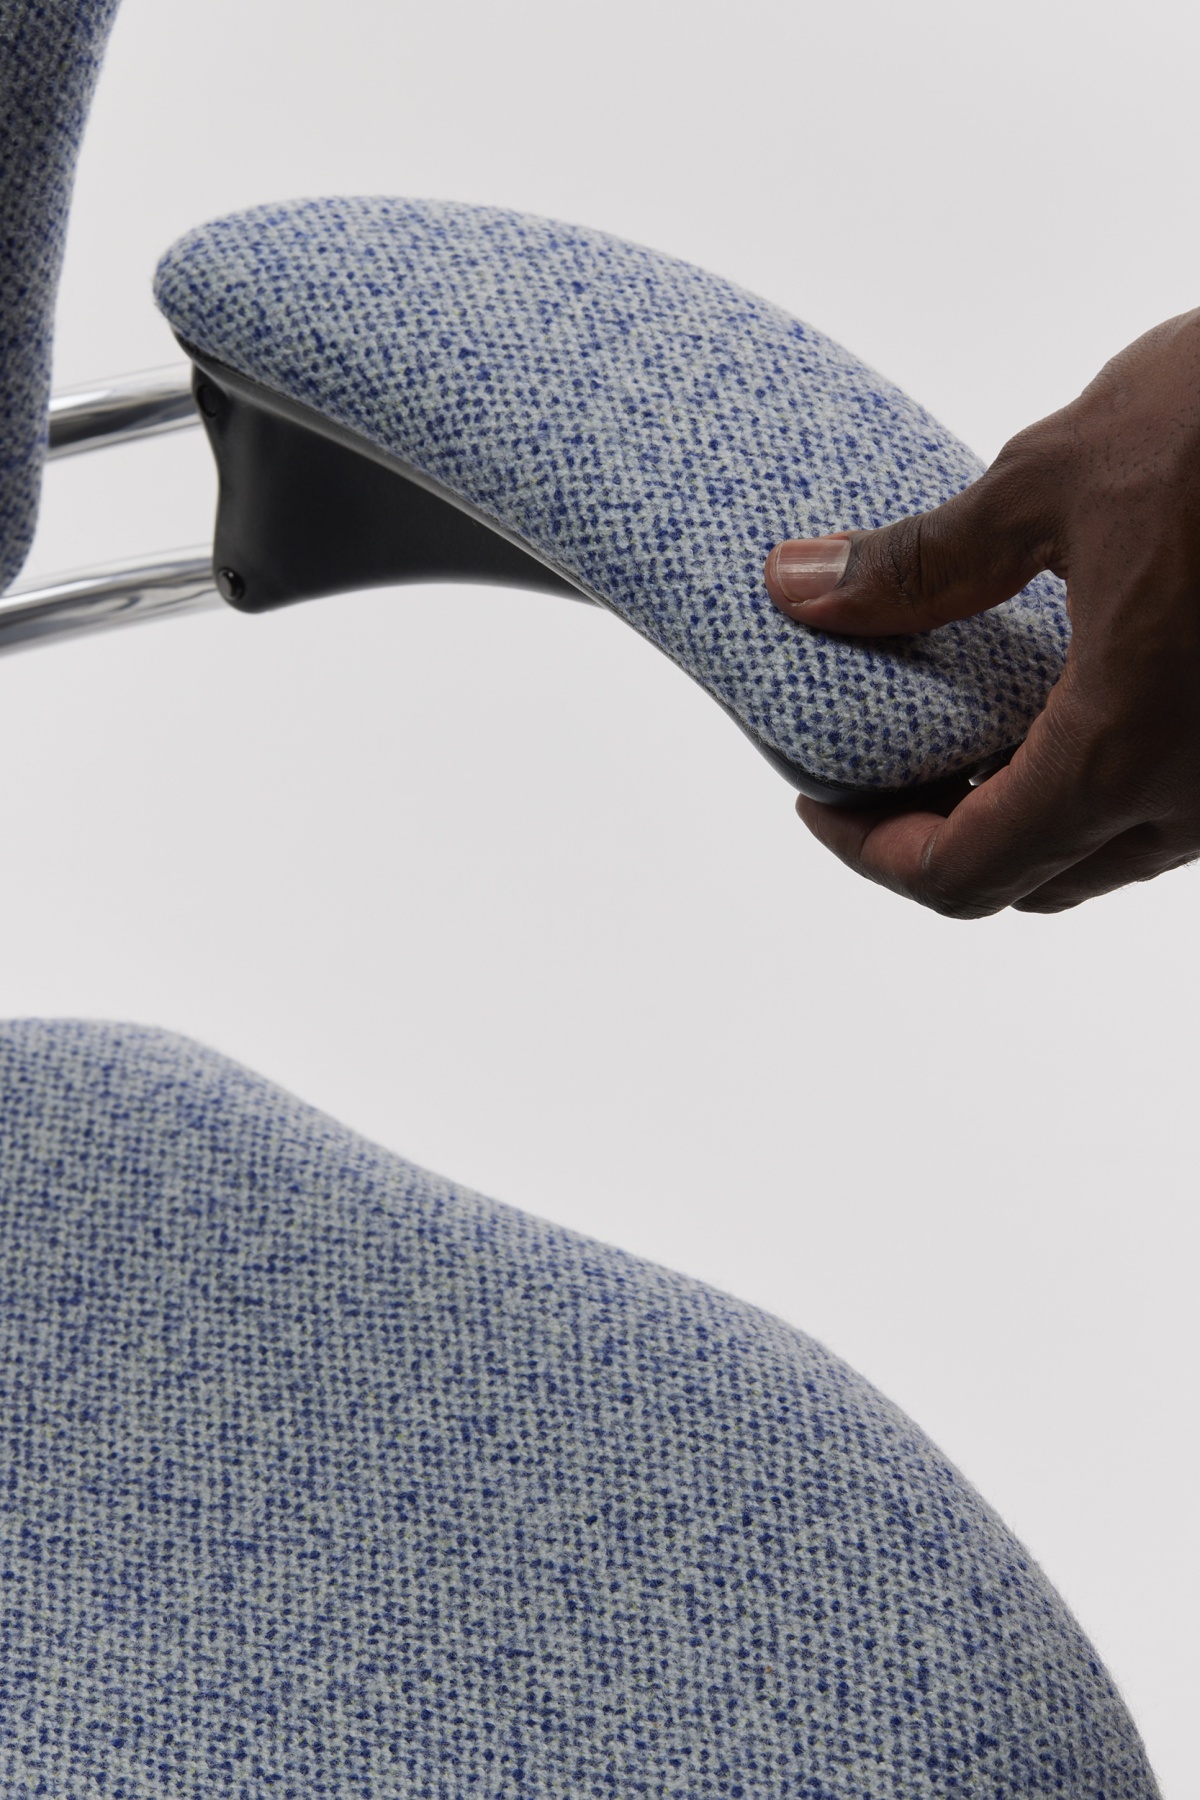 Humanscale and Kvadrat collaboration